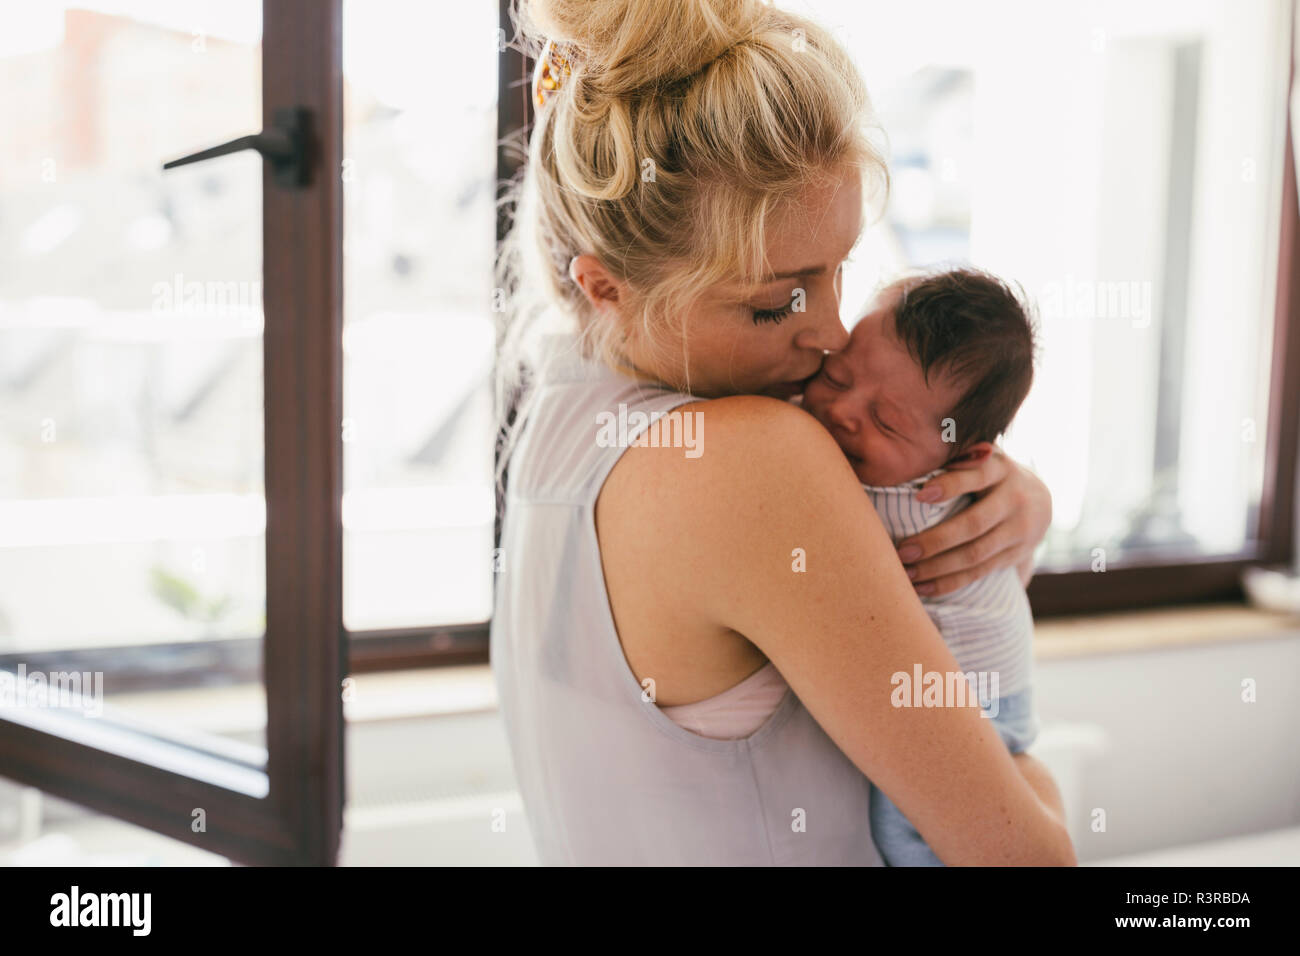 Mother holding her crying baby close to her shoulder at home Stock Photo